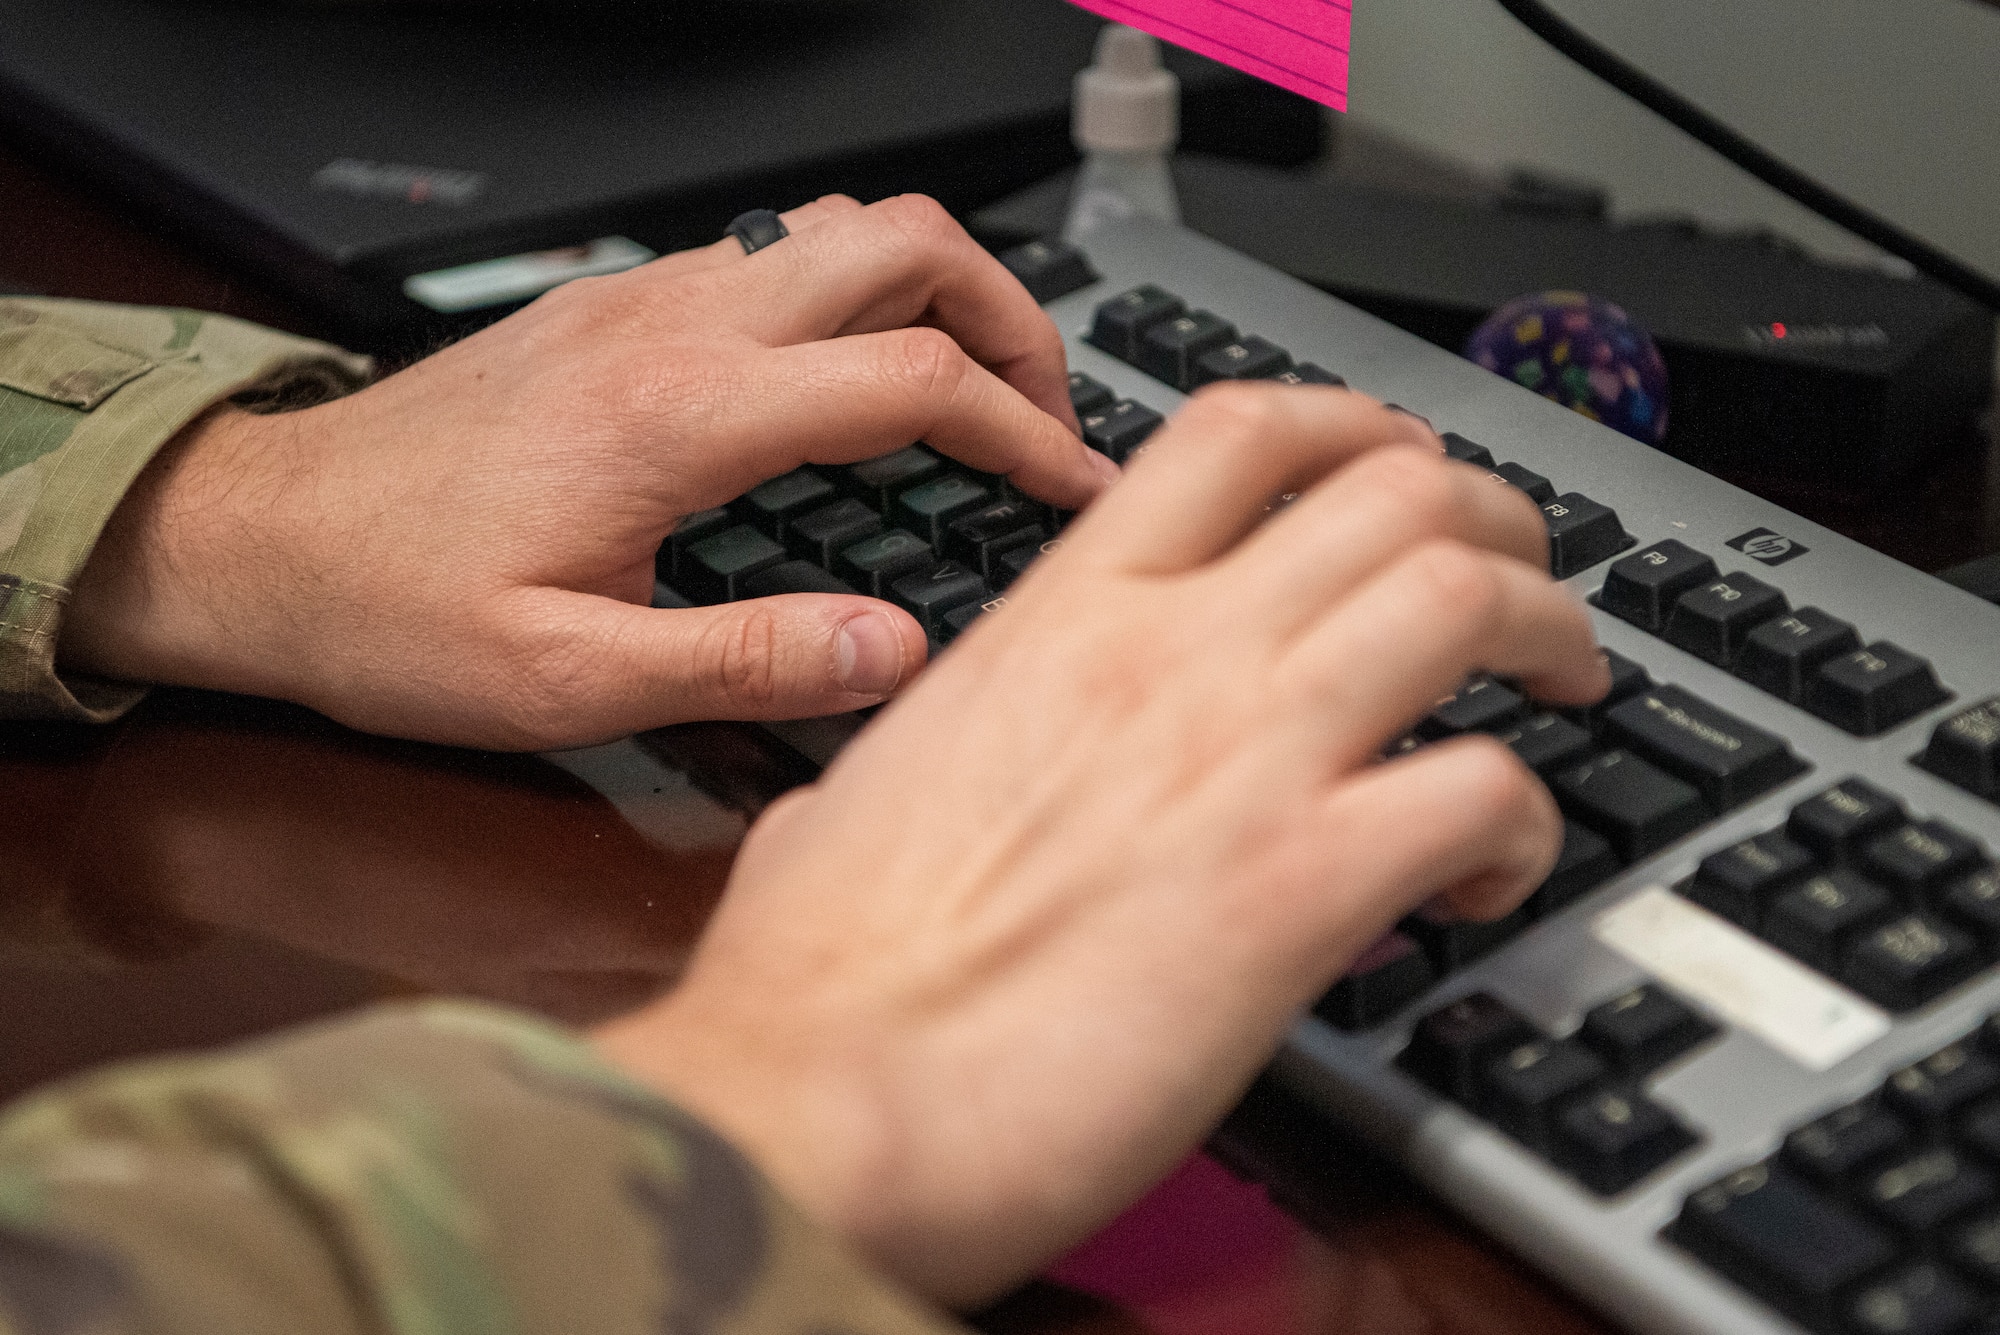 U.S. Air Force Tech. Sgt. Andrew Noble, 81st Training Wing commander’s action group superintendent, types on his computer in the 81st TRW Headquarters building on Keesler Air Force Base, Mississippi, Aug. 15, 2023.